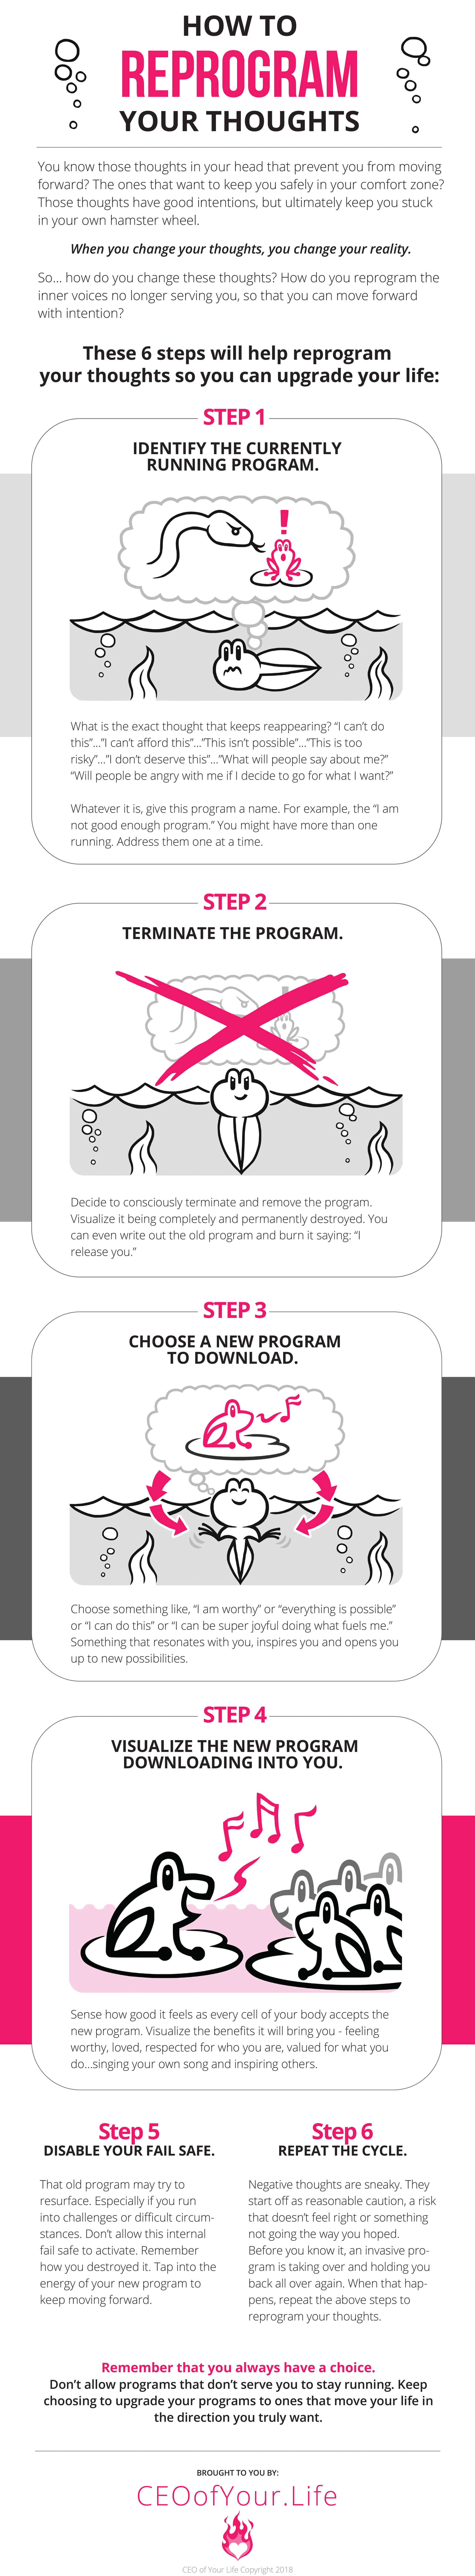 Infographic: How to reprogram your thoughts